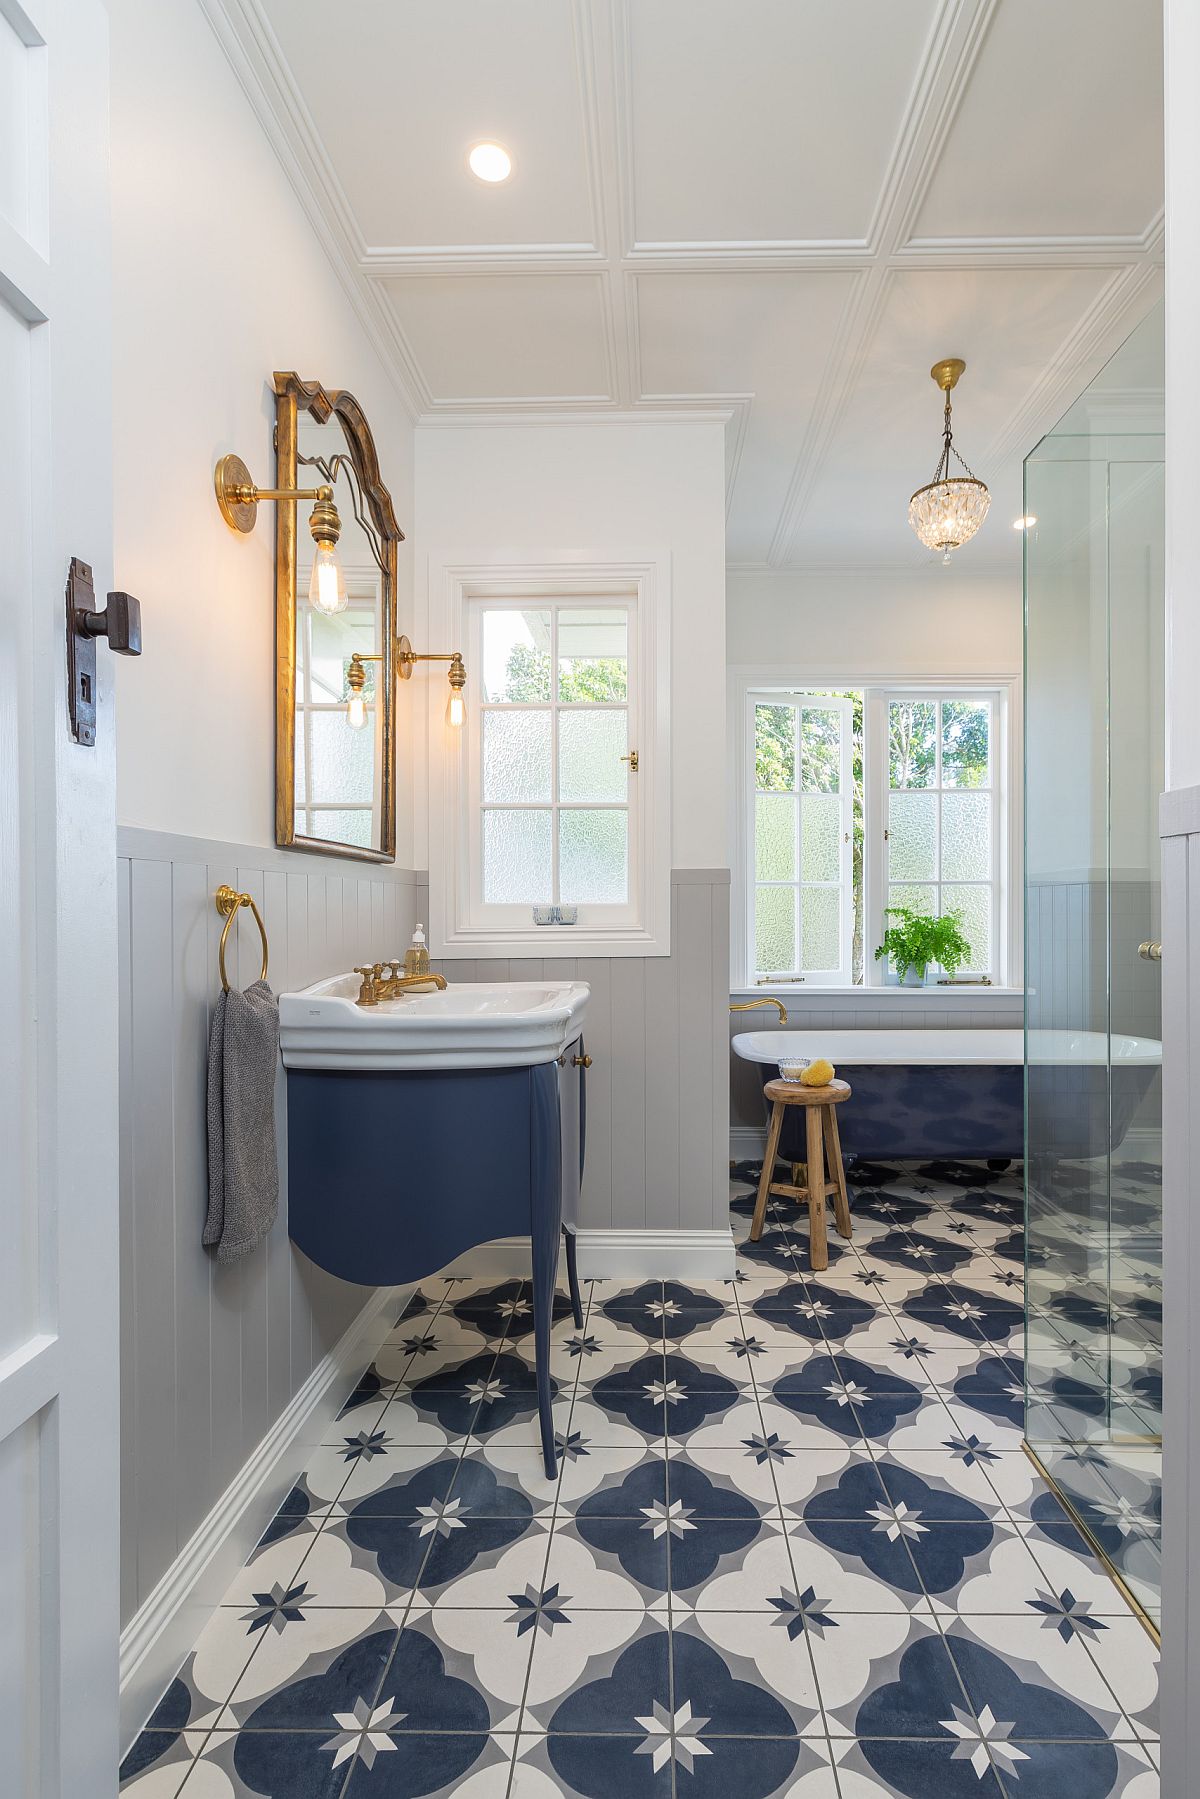 Classic-blue-used-to-highlight-both-the-vanity-and-bathtub-in-the-bathroom-78095